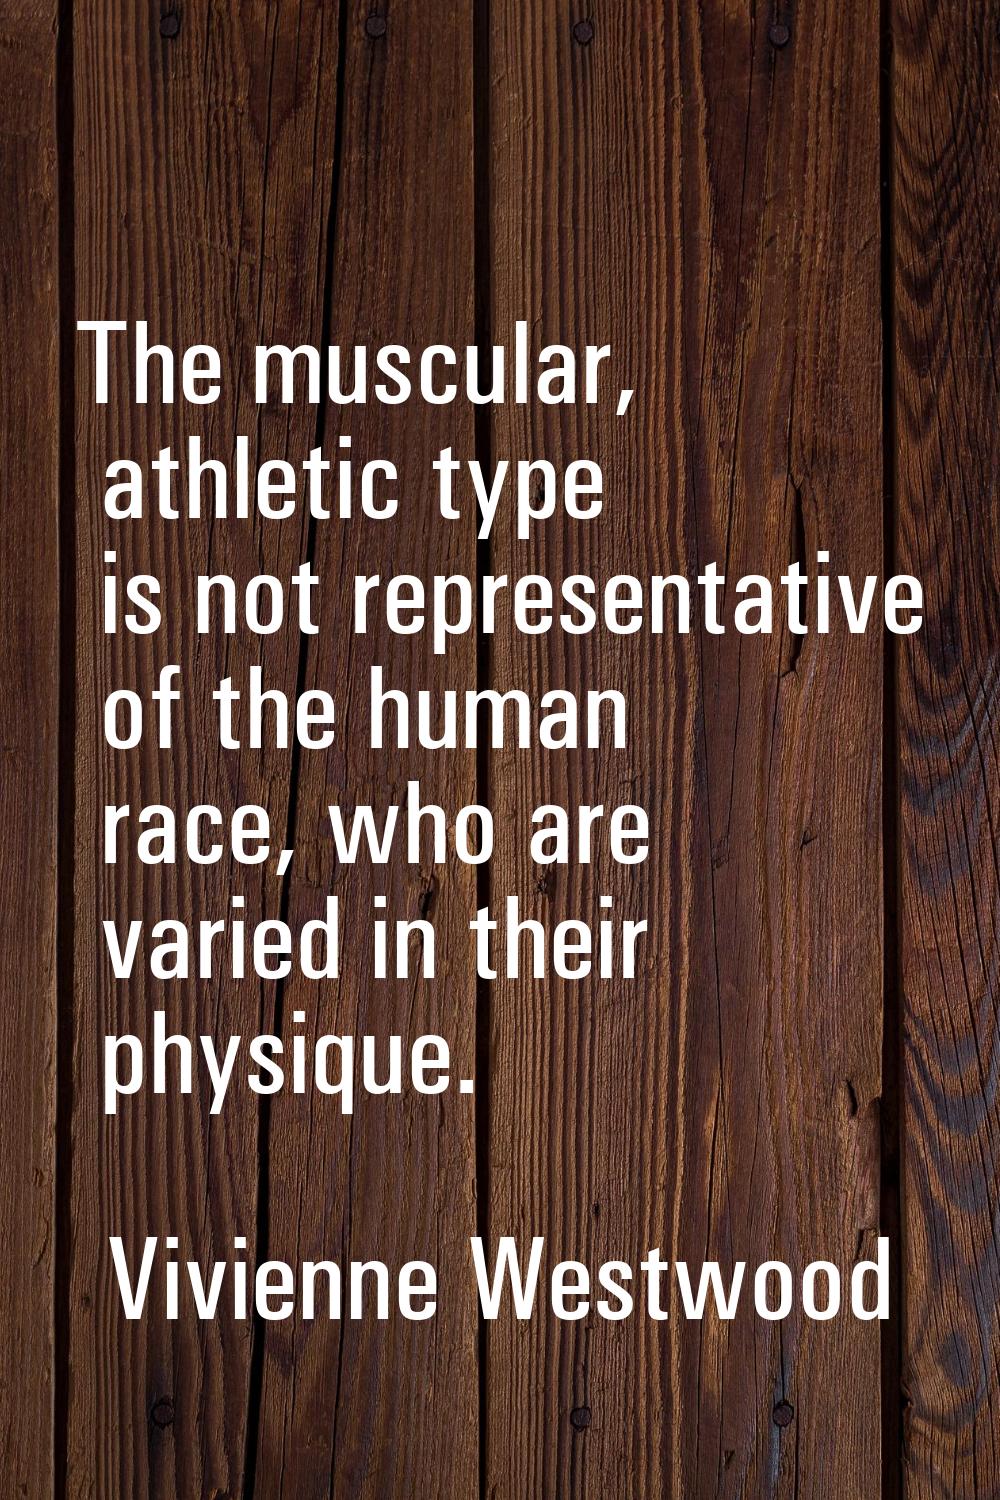 The muscular, athletic type is not representative of the human race, who are varied in their physiq